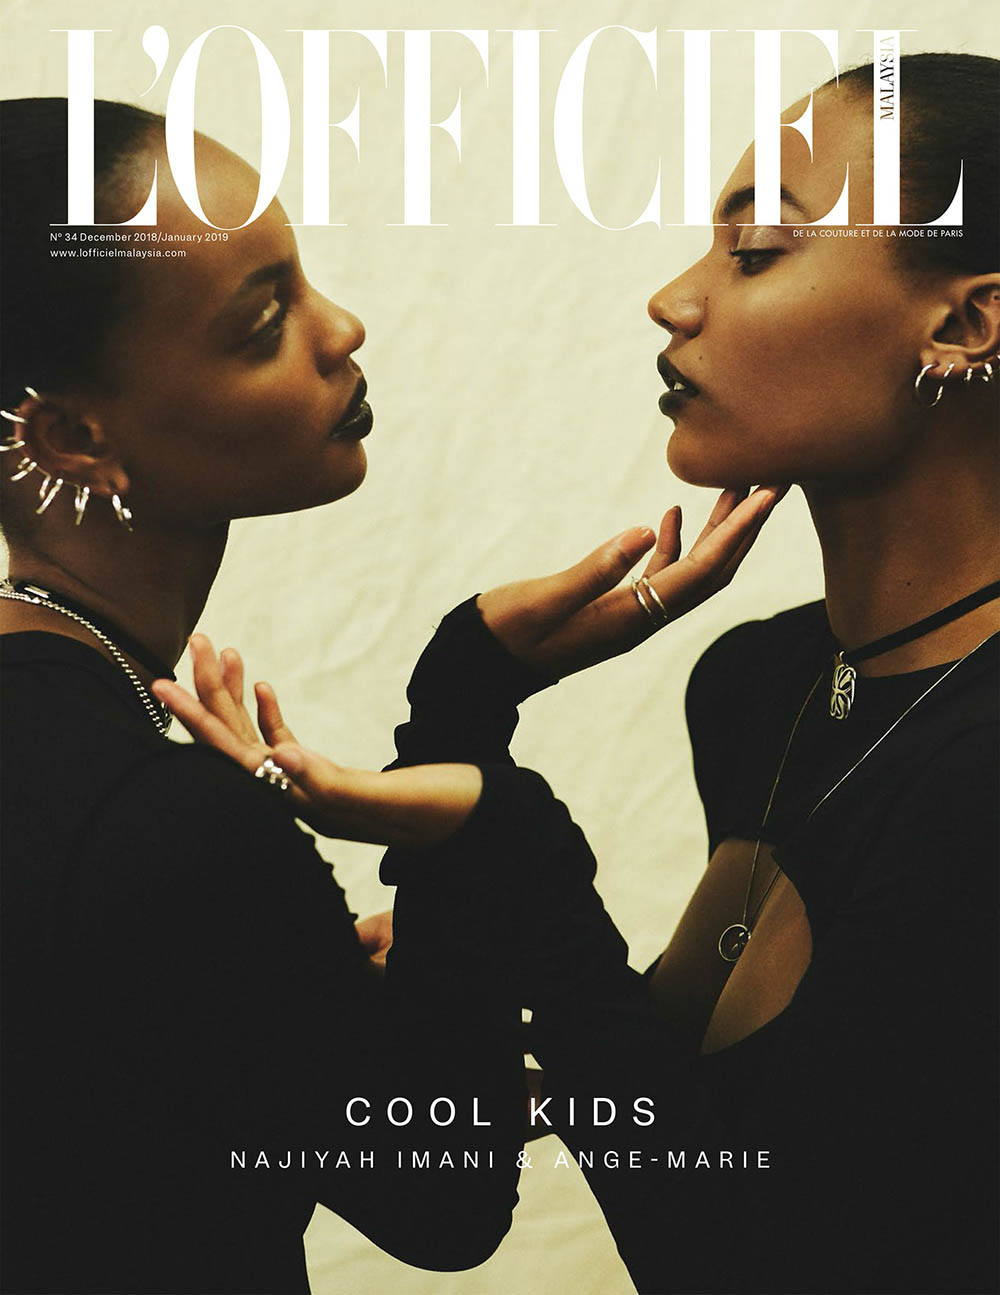 Ange-Marie and Najiyah Imani cover L’Officiel Malaysia December 2018 January 2019 by Hao Zeng